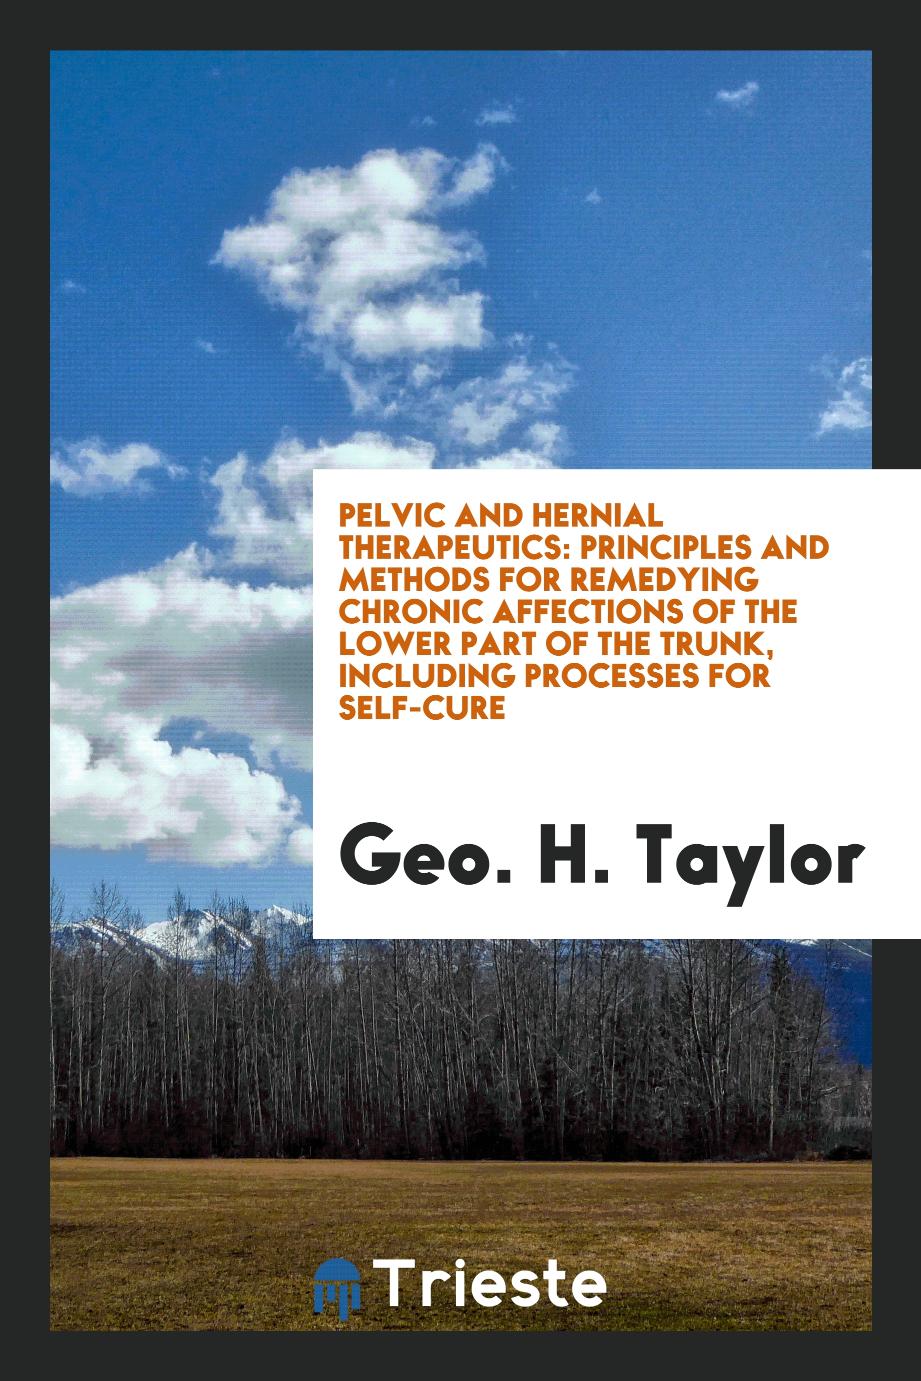 Pelvic and Hernial Therapeutics: Principles and Methods for Remedying Chronic Affections of the Lower Part of the Trunk, Including Processes for Self-Cure